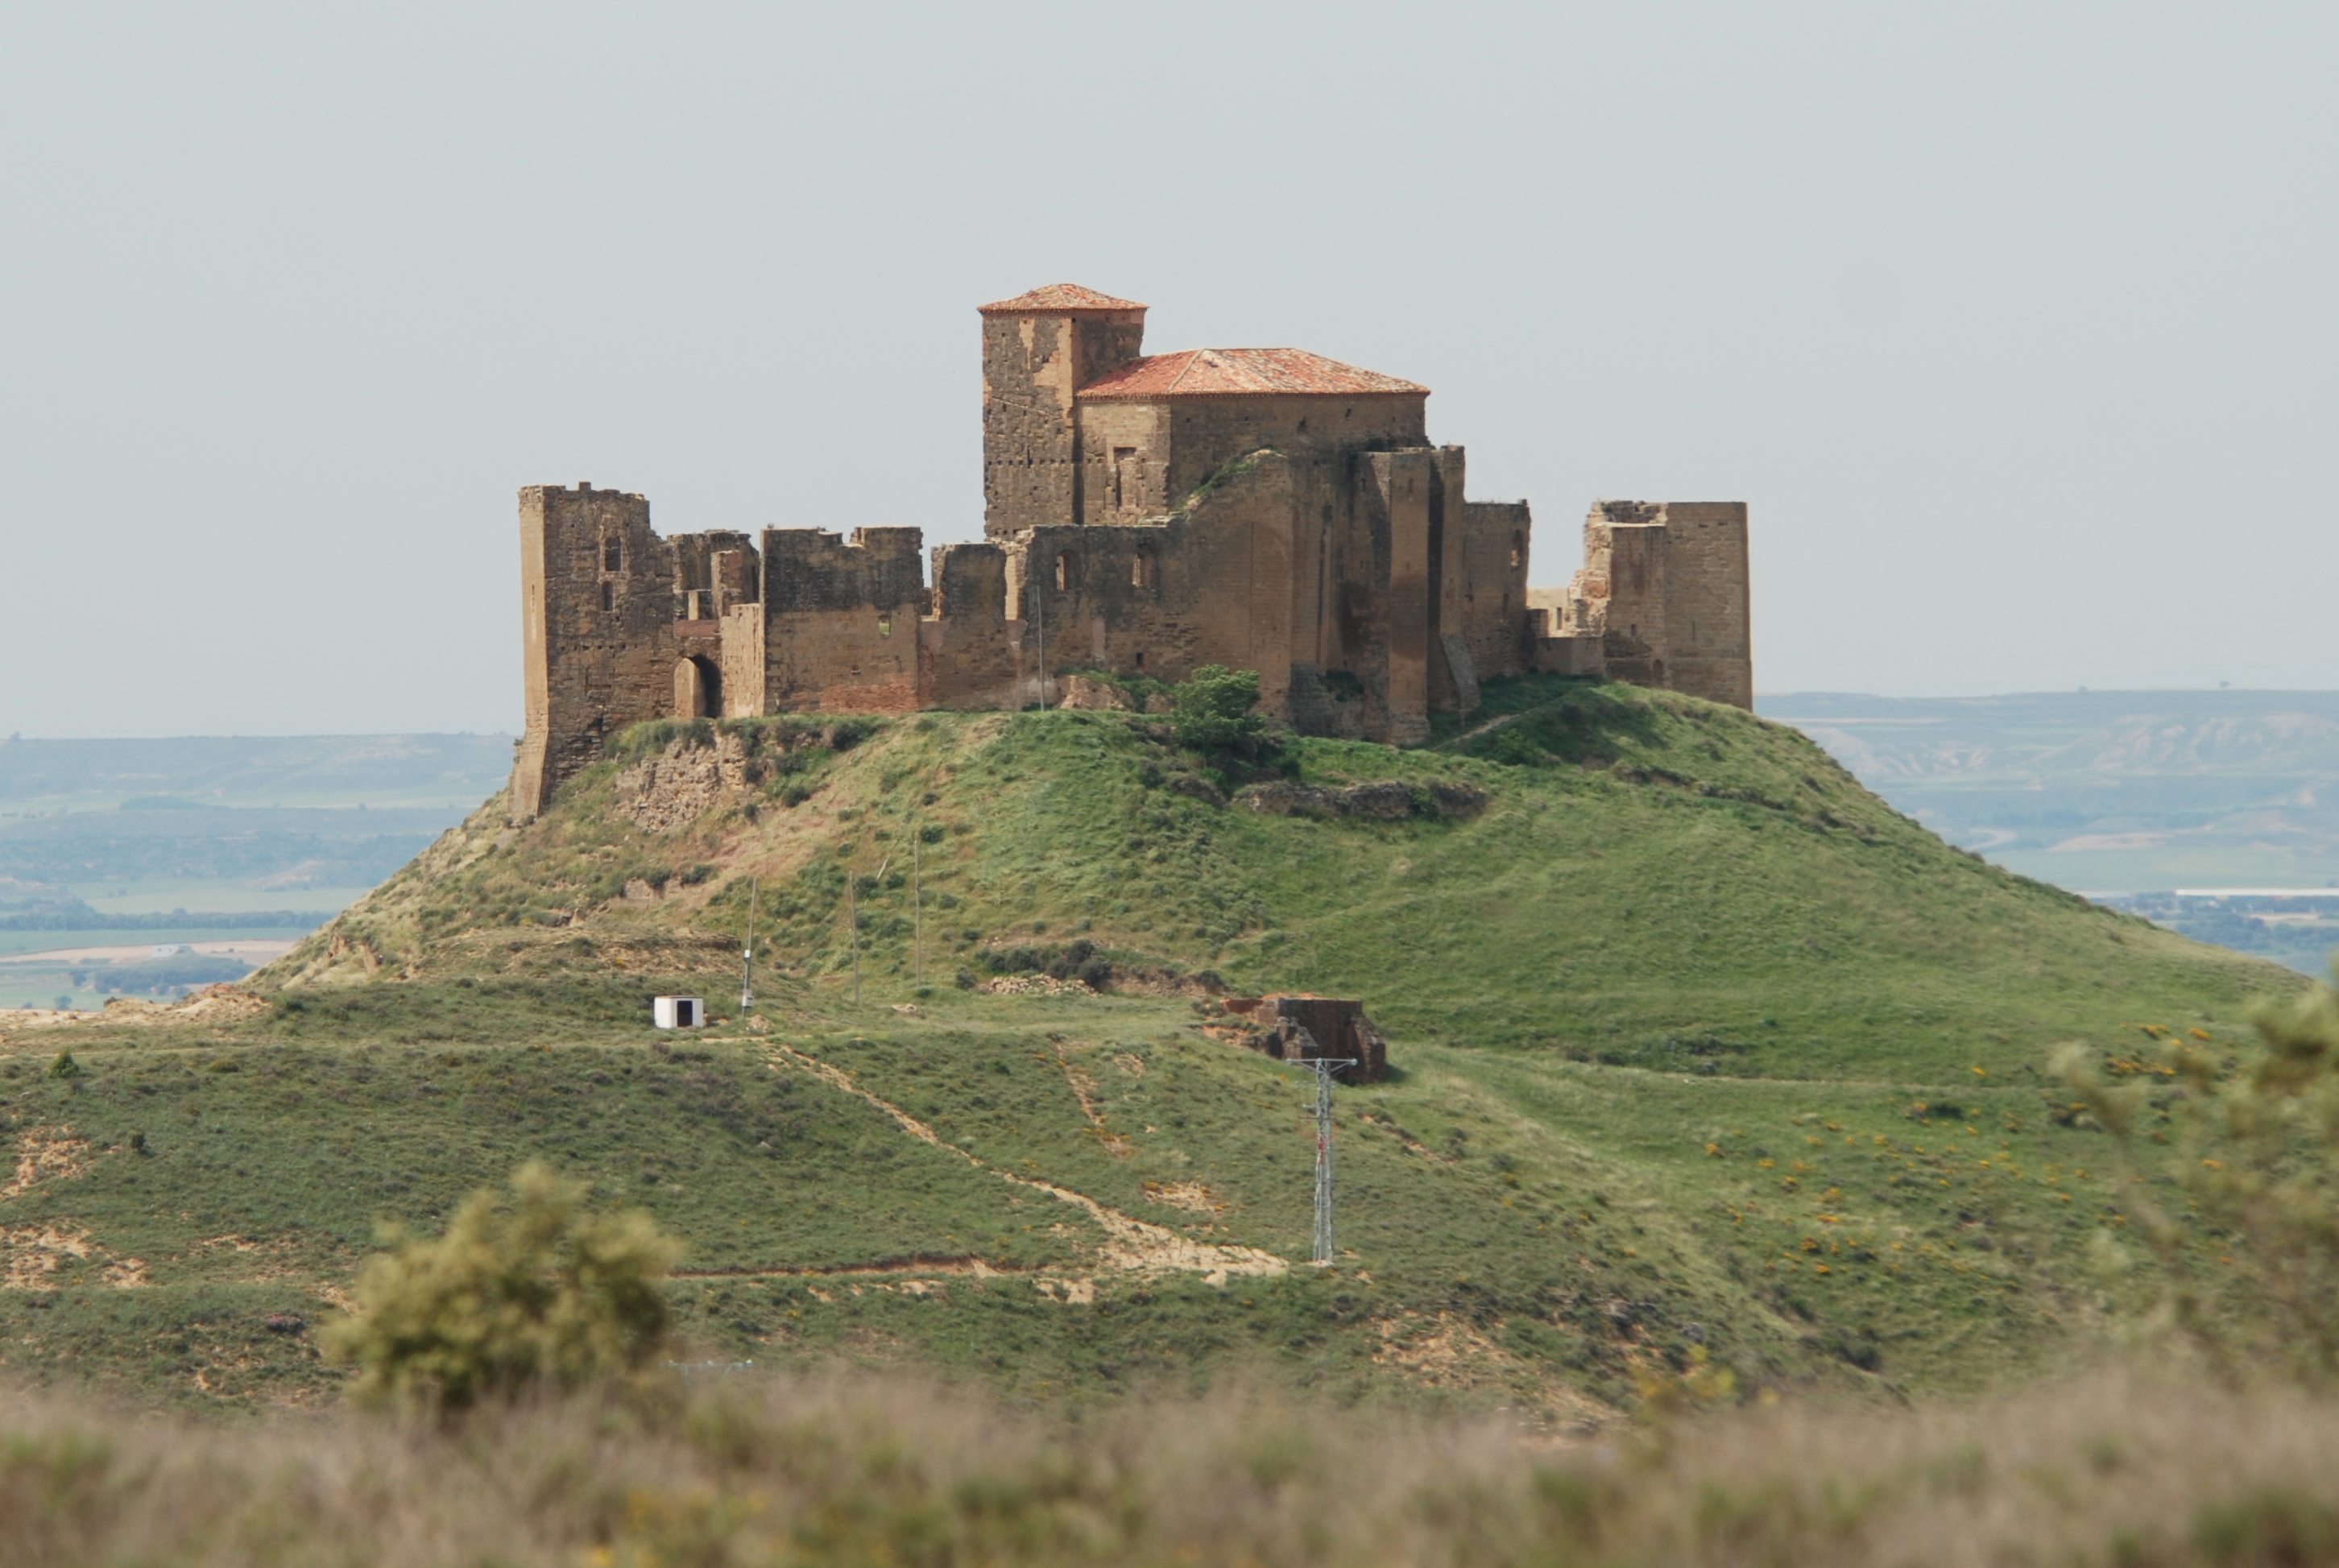 Click picture to see more of Montearagon.